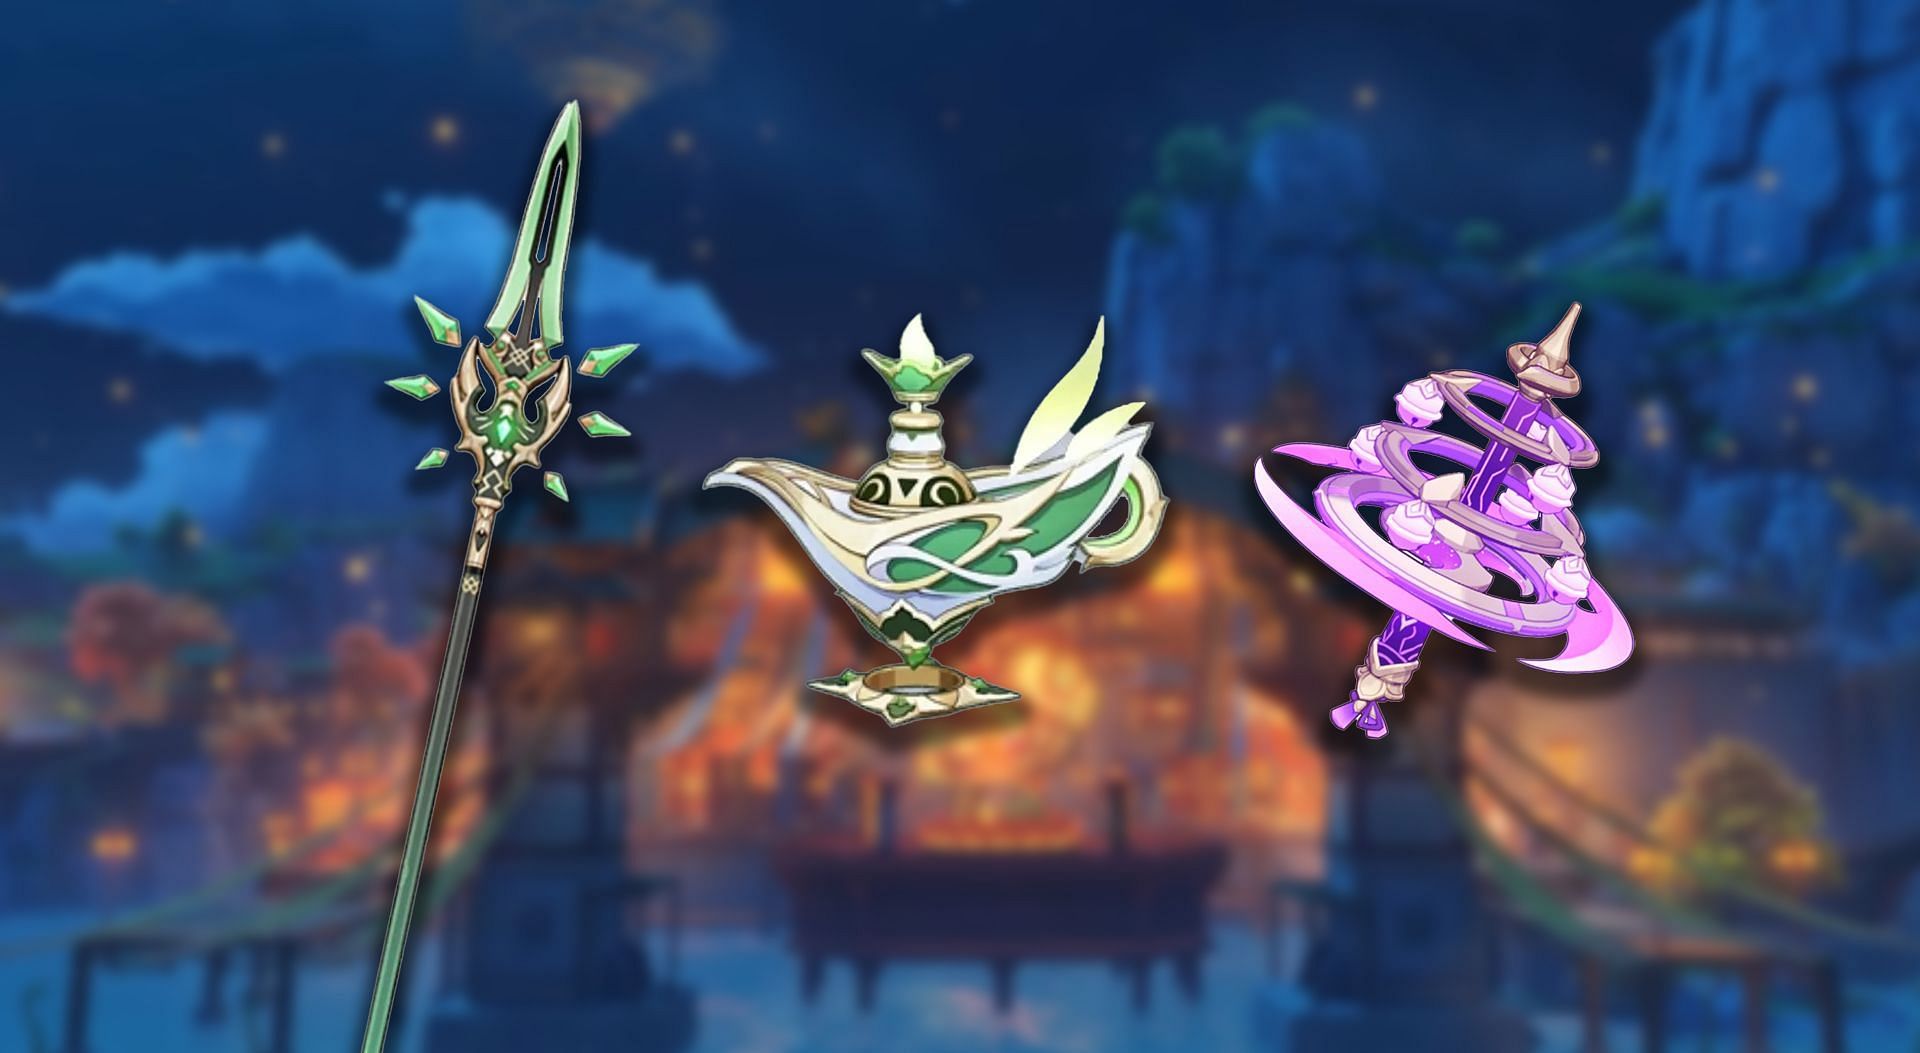 5-star weapons that will be featured in v4.4 (Image via HoYoverse)